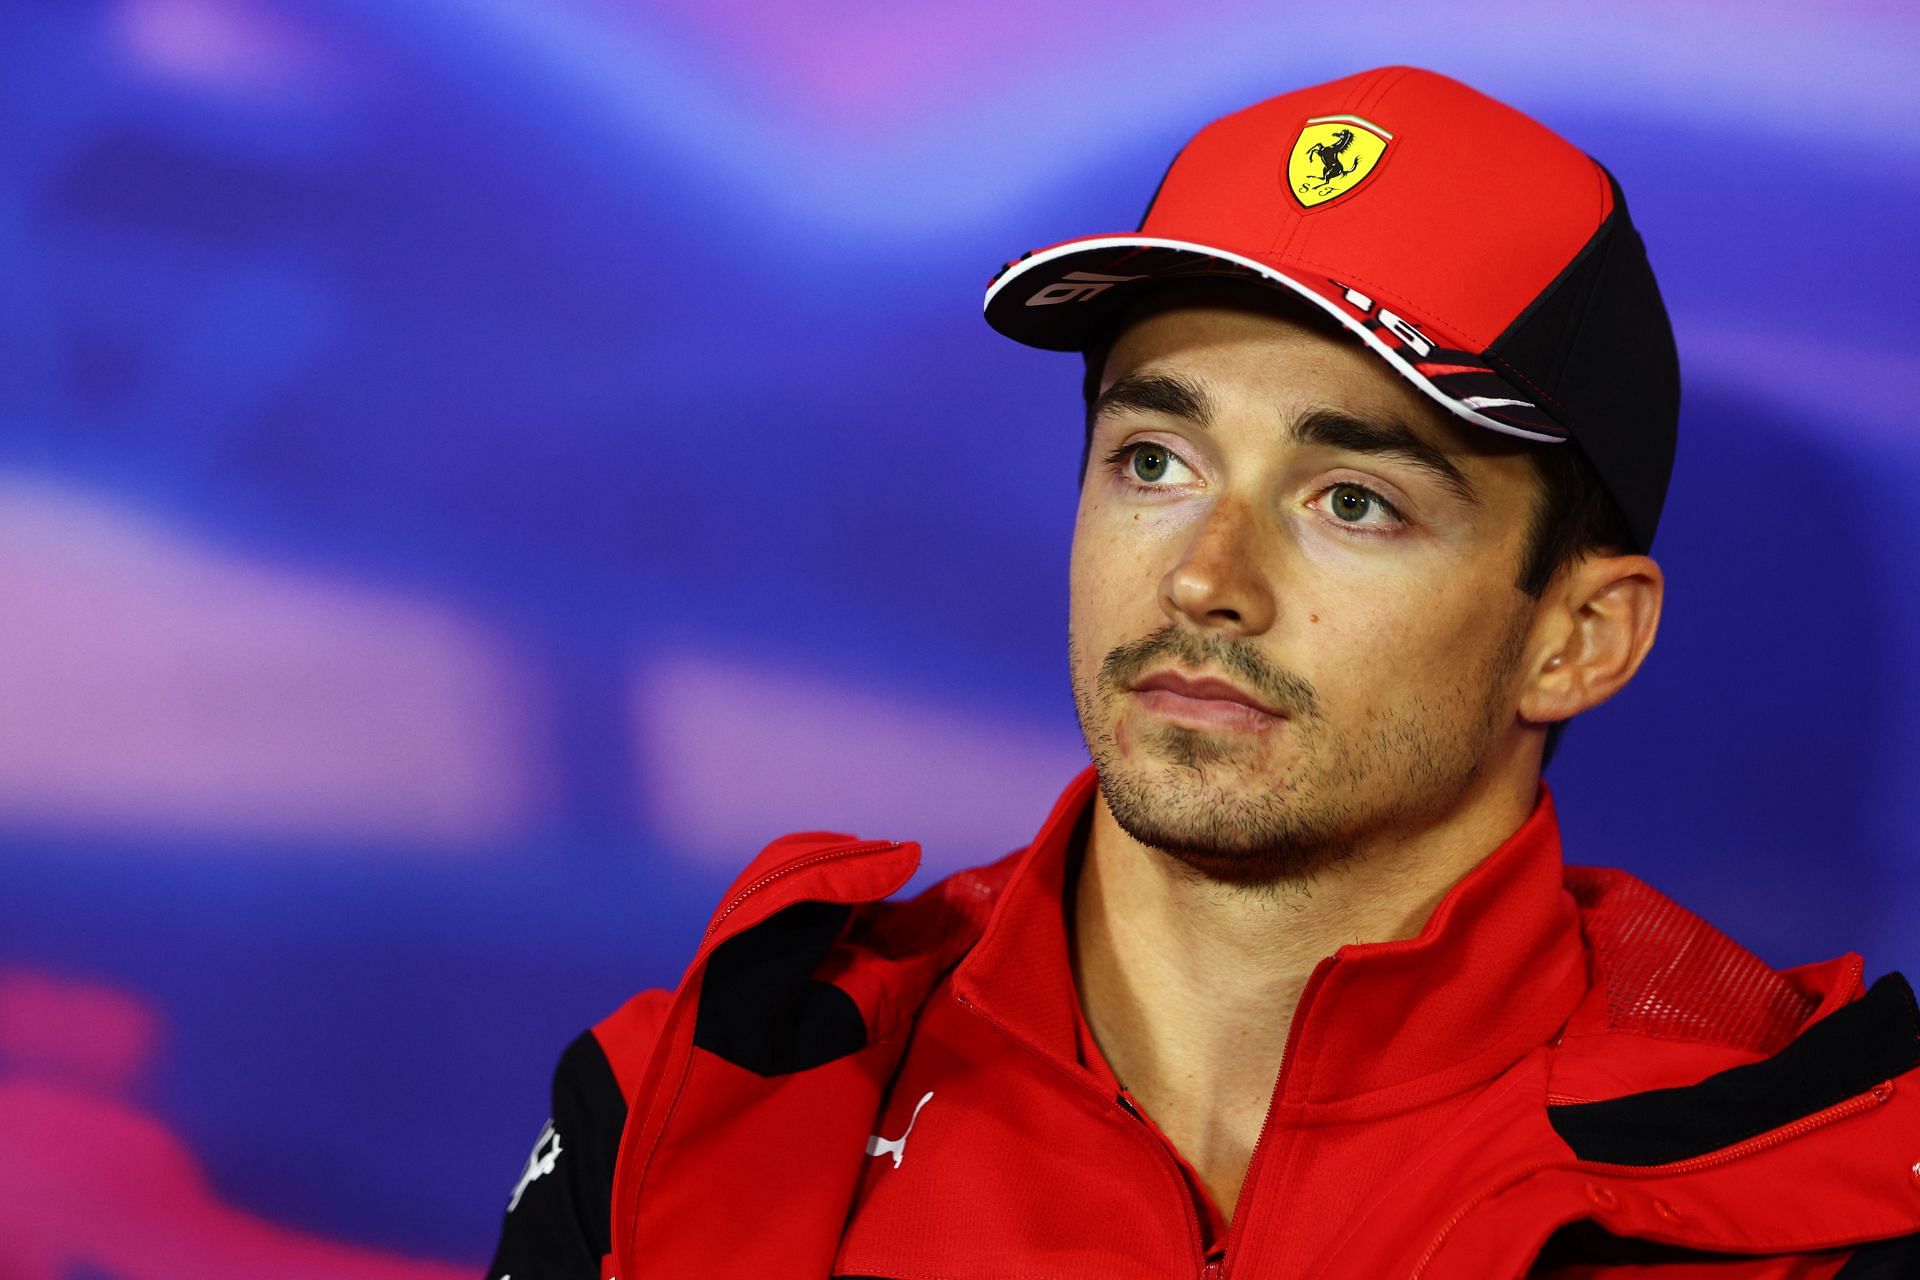 Charles Leclerc looks on in the Drivers Press Conference during previews ahead of the F1 Grand Prix of Great Britain at Silverstone on June 30, 2022 in Northampton, England. (Photo by Clive Rose/Getty Images)